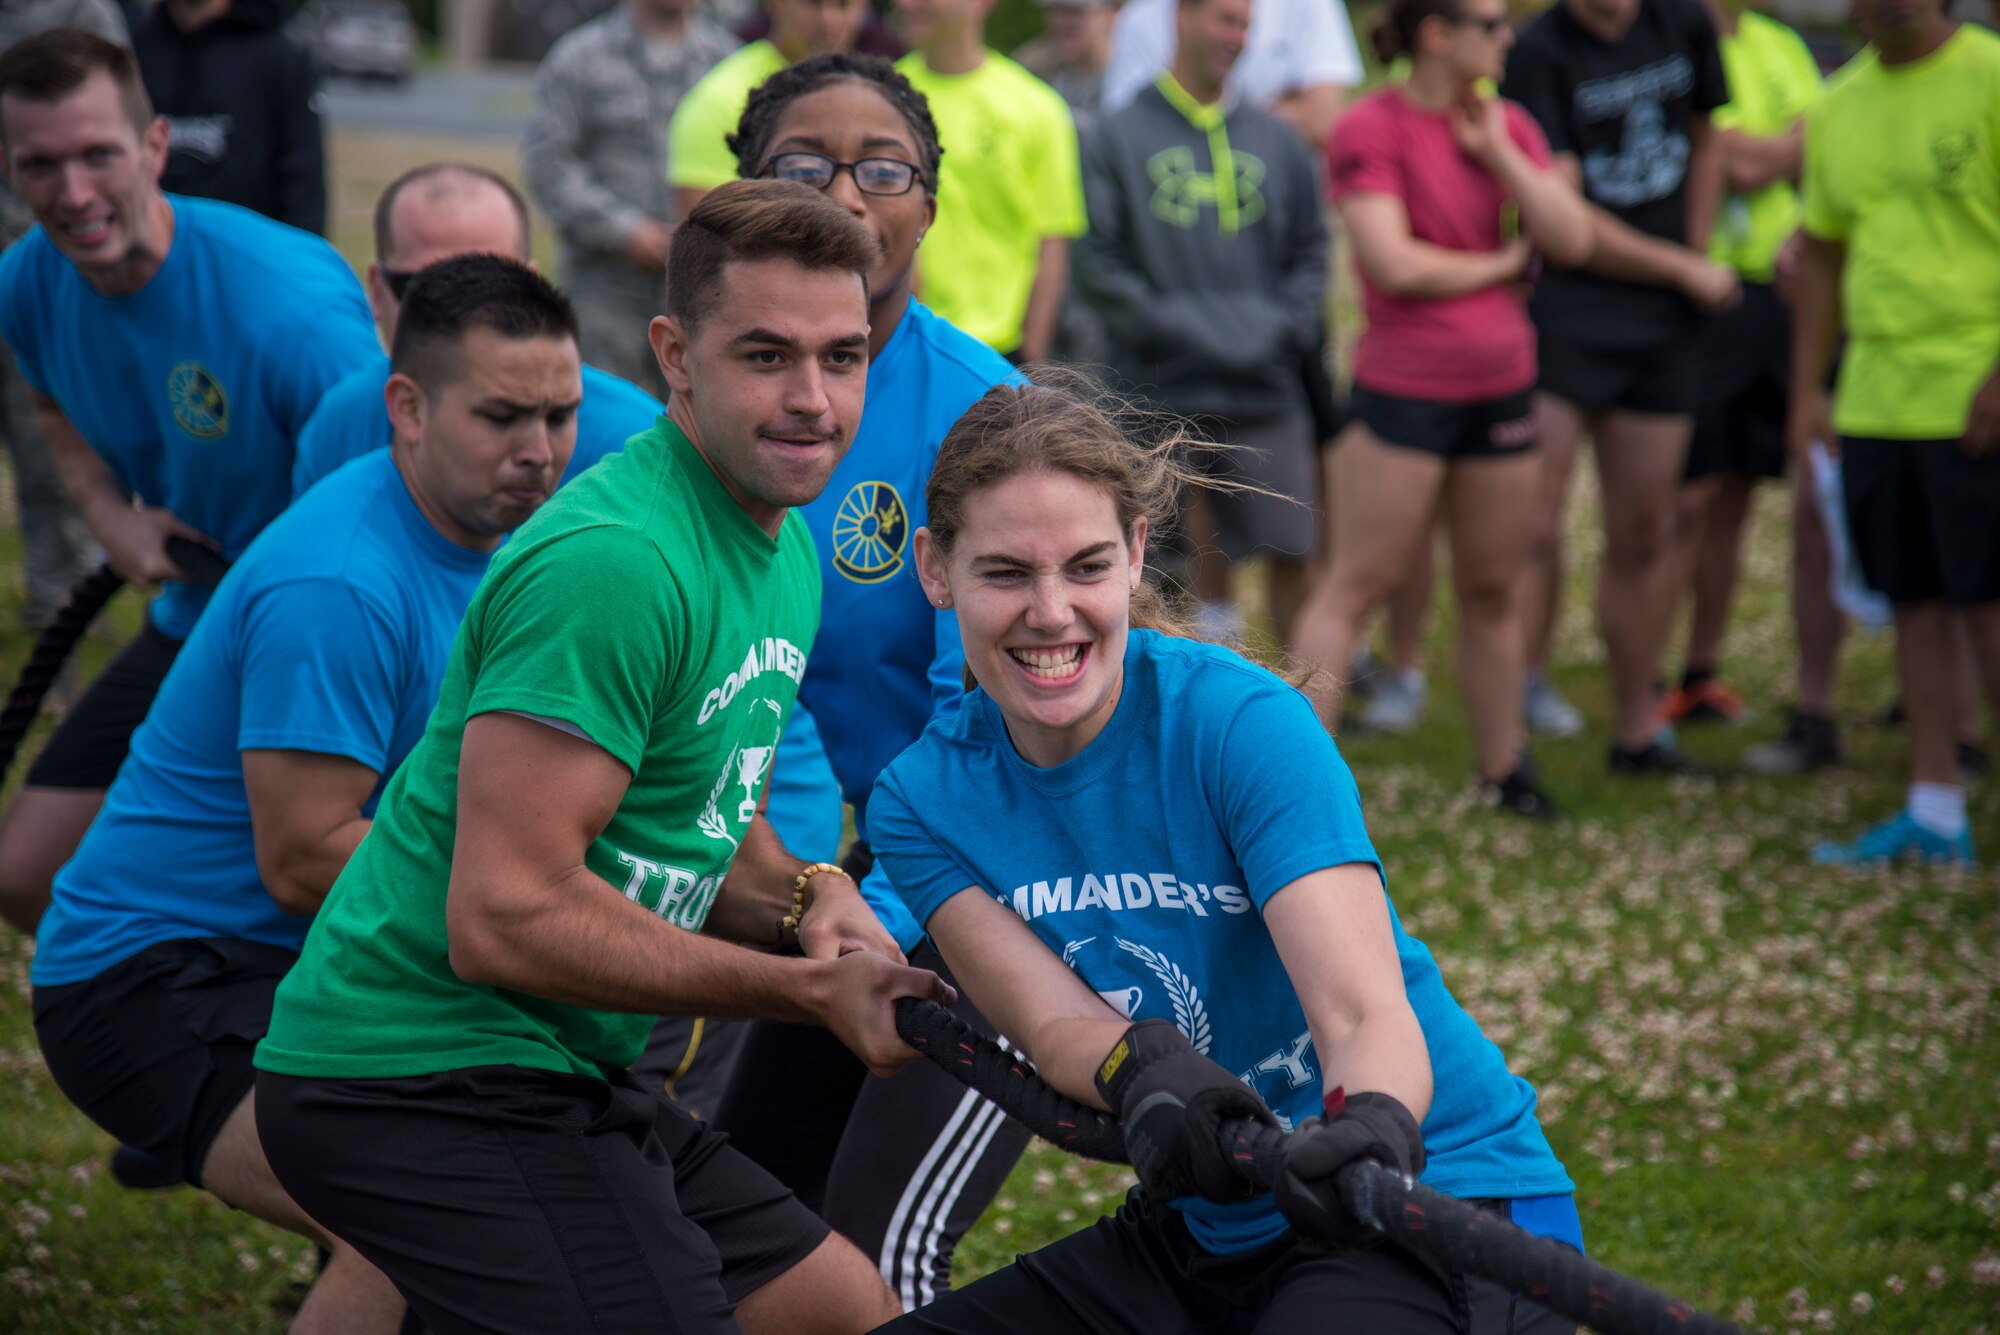 Members from the 436th Force Support Squadron participate in a game of tug-of-war June 14, 2019 at Dover Air Force Base, Del. The sports were specifically chosen to focus on combat readiness, competitiveness, teamwork and fun. (U.S. Air Force photo by A1C Jonathan Harding)